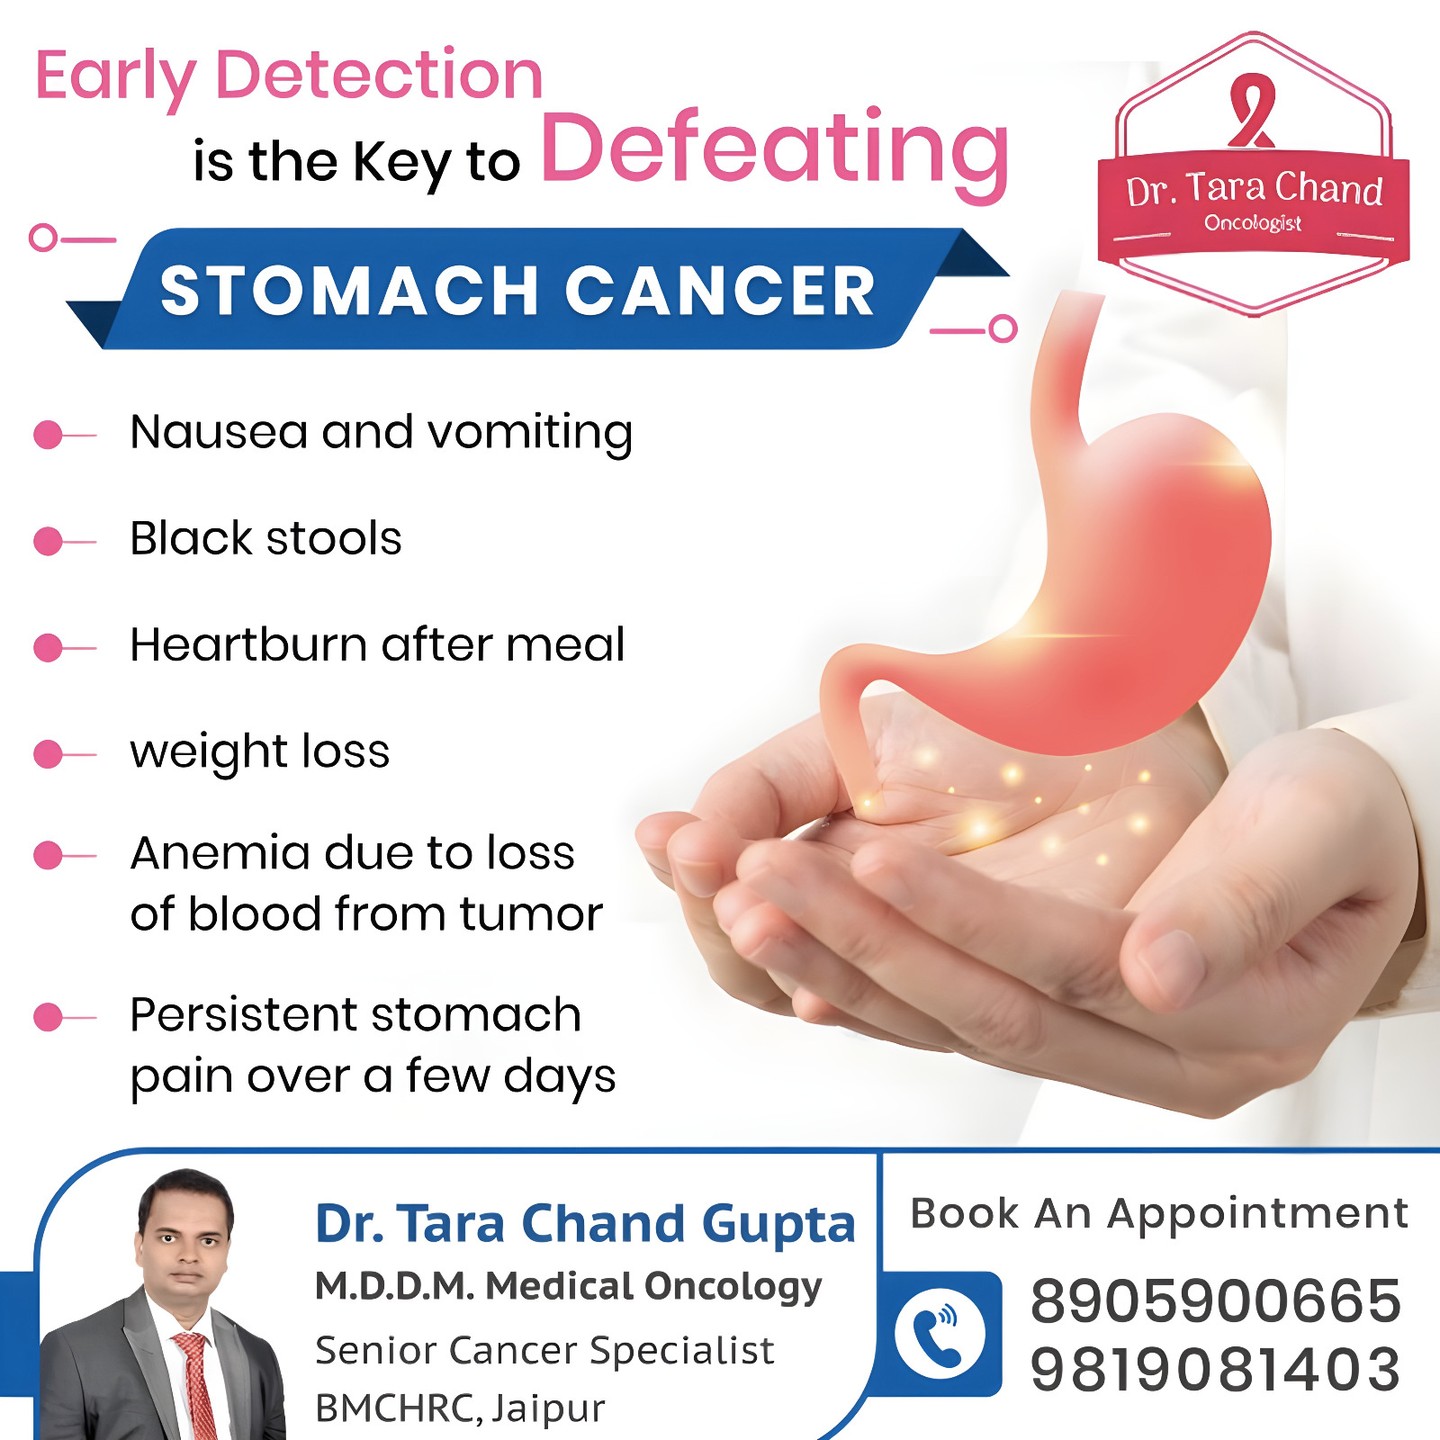 Recognize the signs of stomach cancer and take action